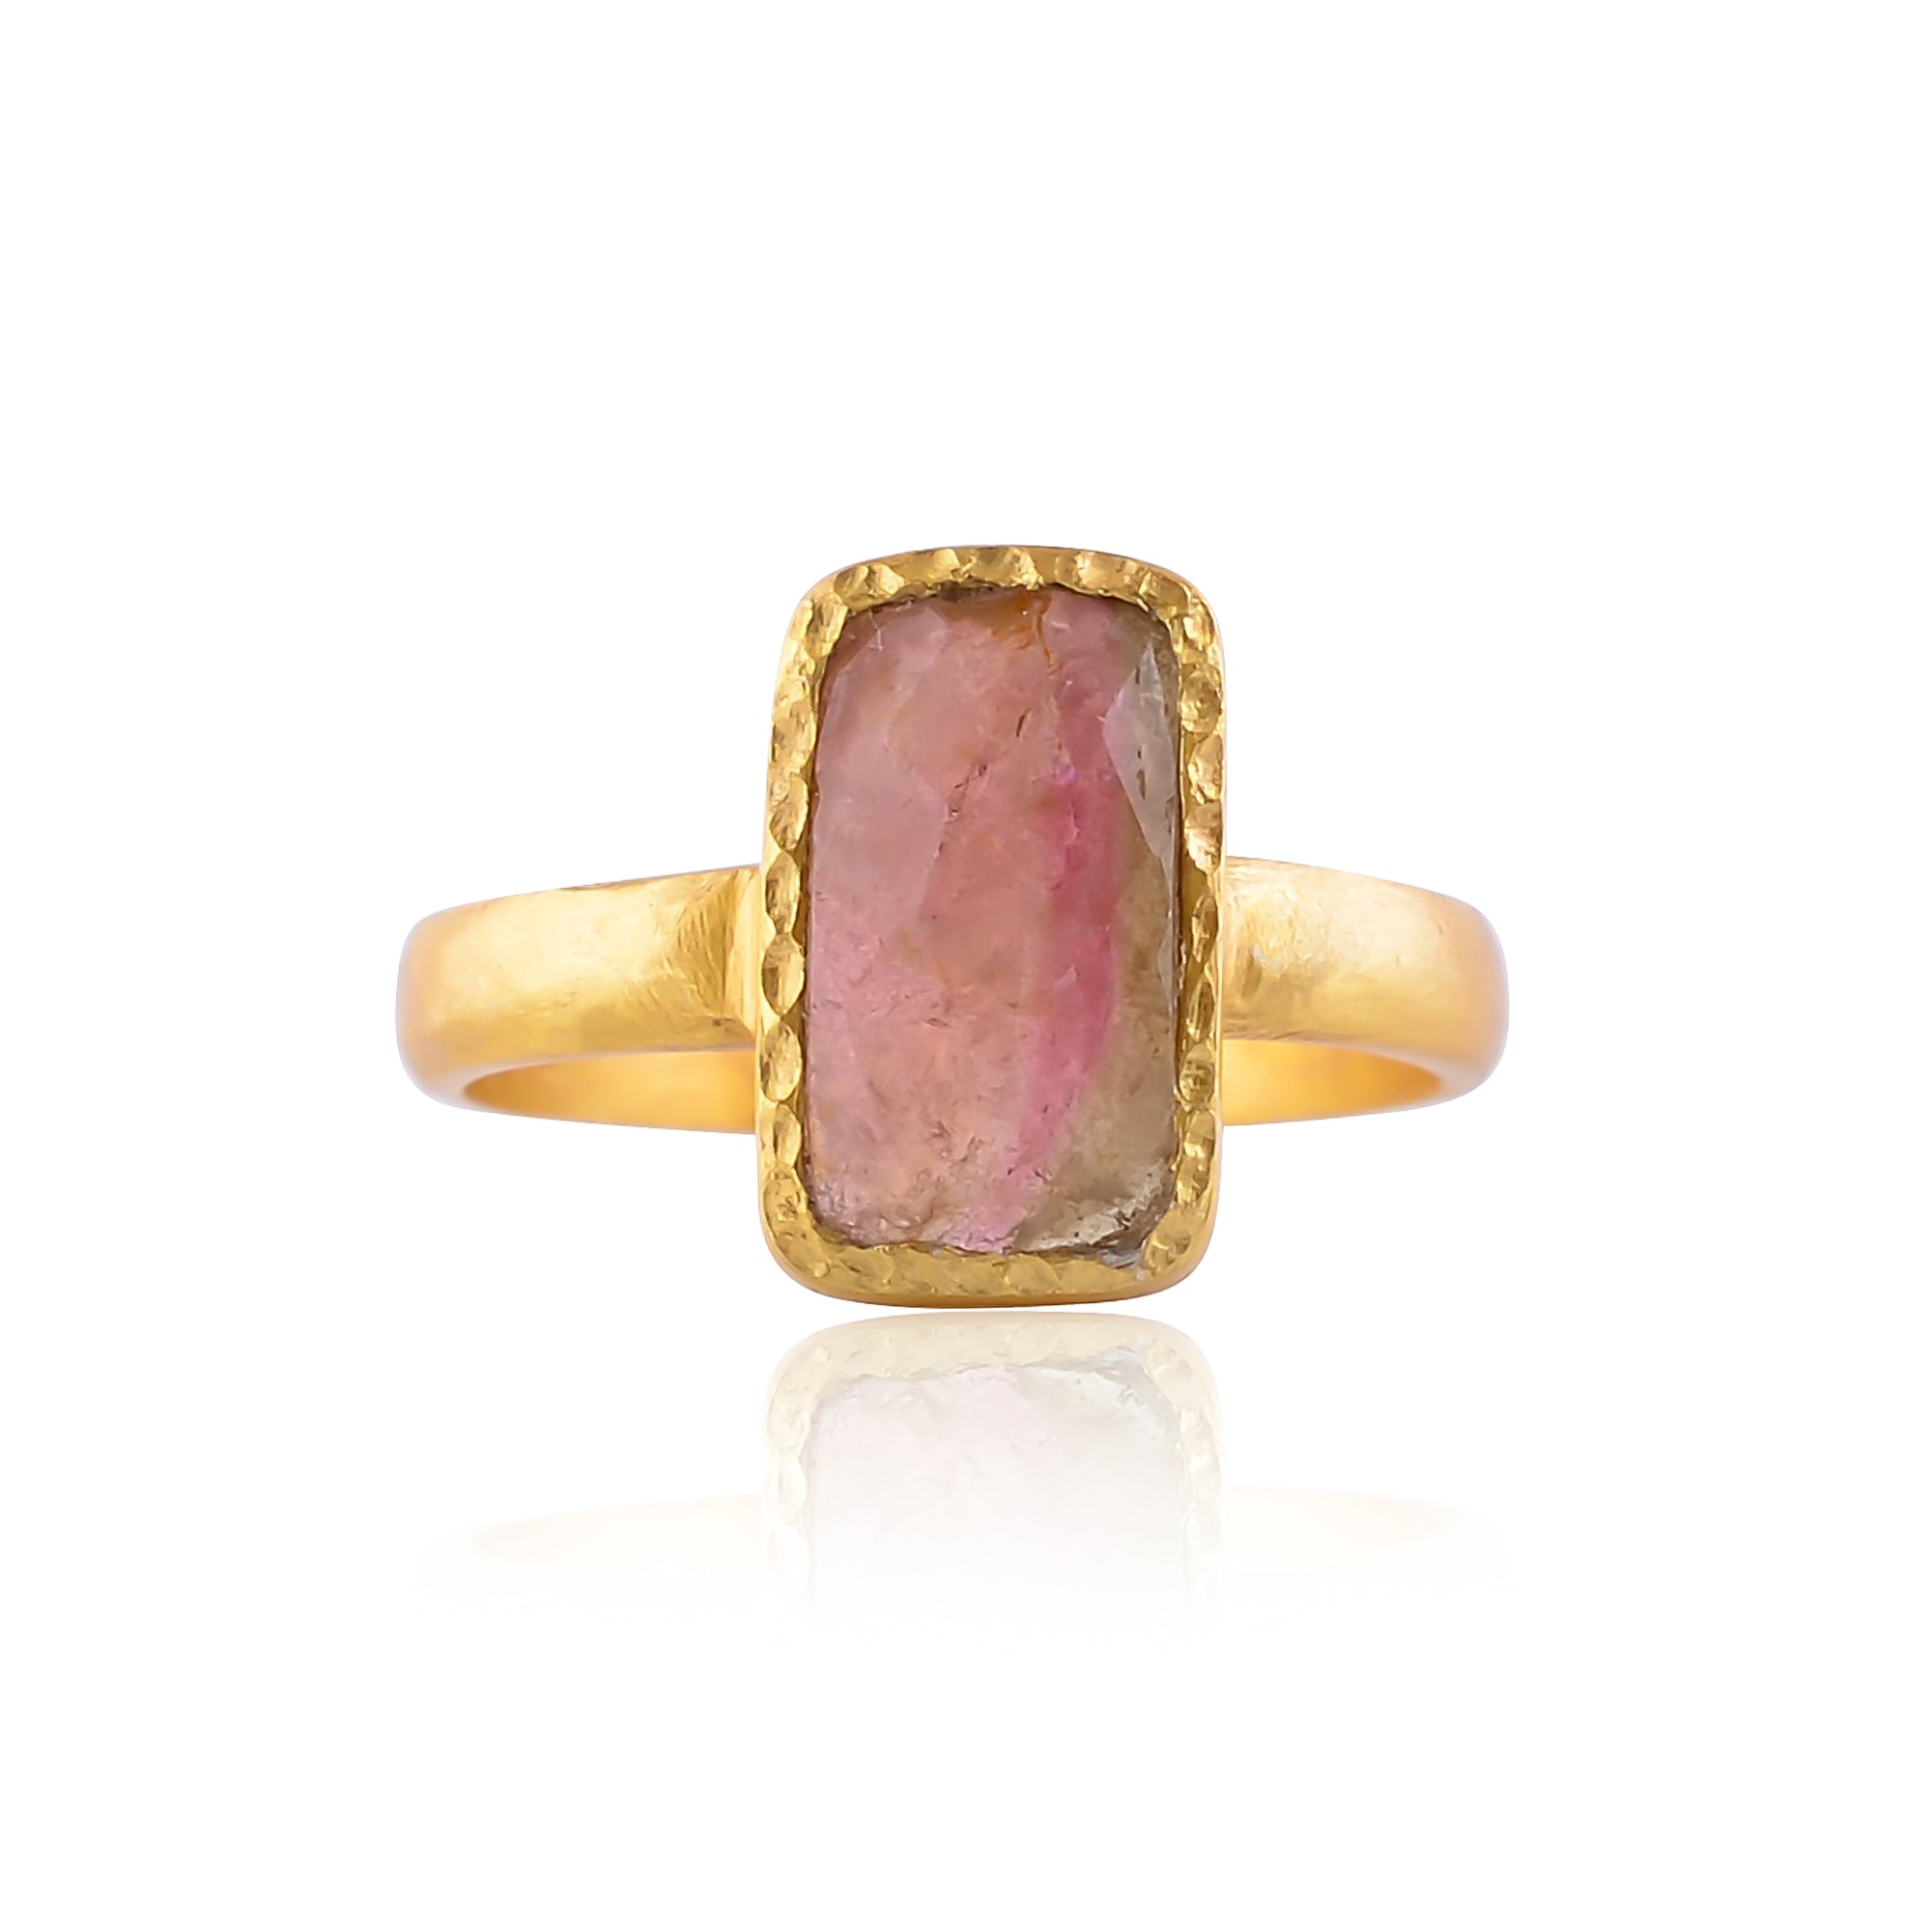 Buy Indian Handcrafted Silver Gold Plated Tourmaline Ring